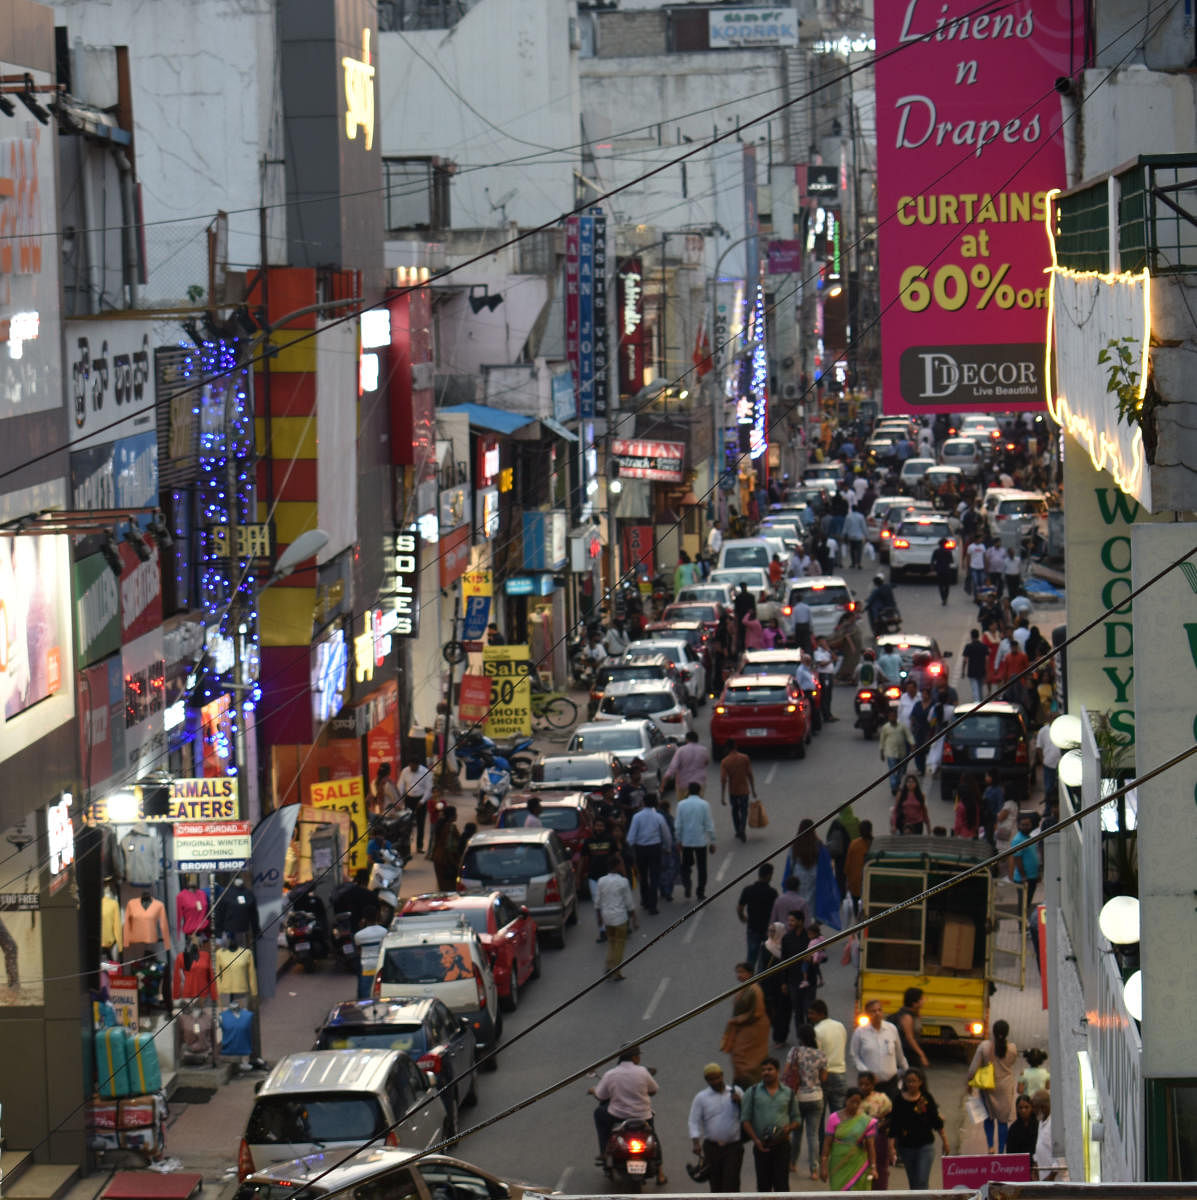 After makeover, vehicle ban on Commercial Street